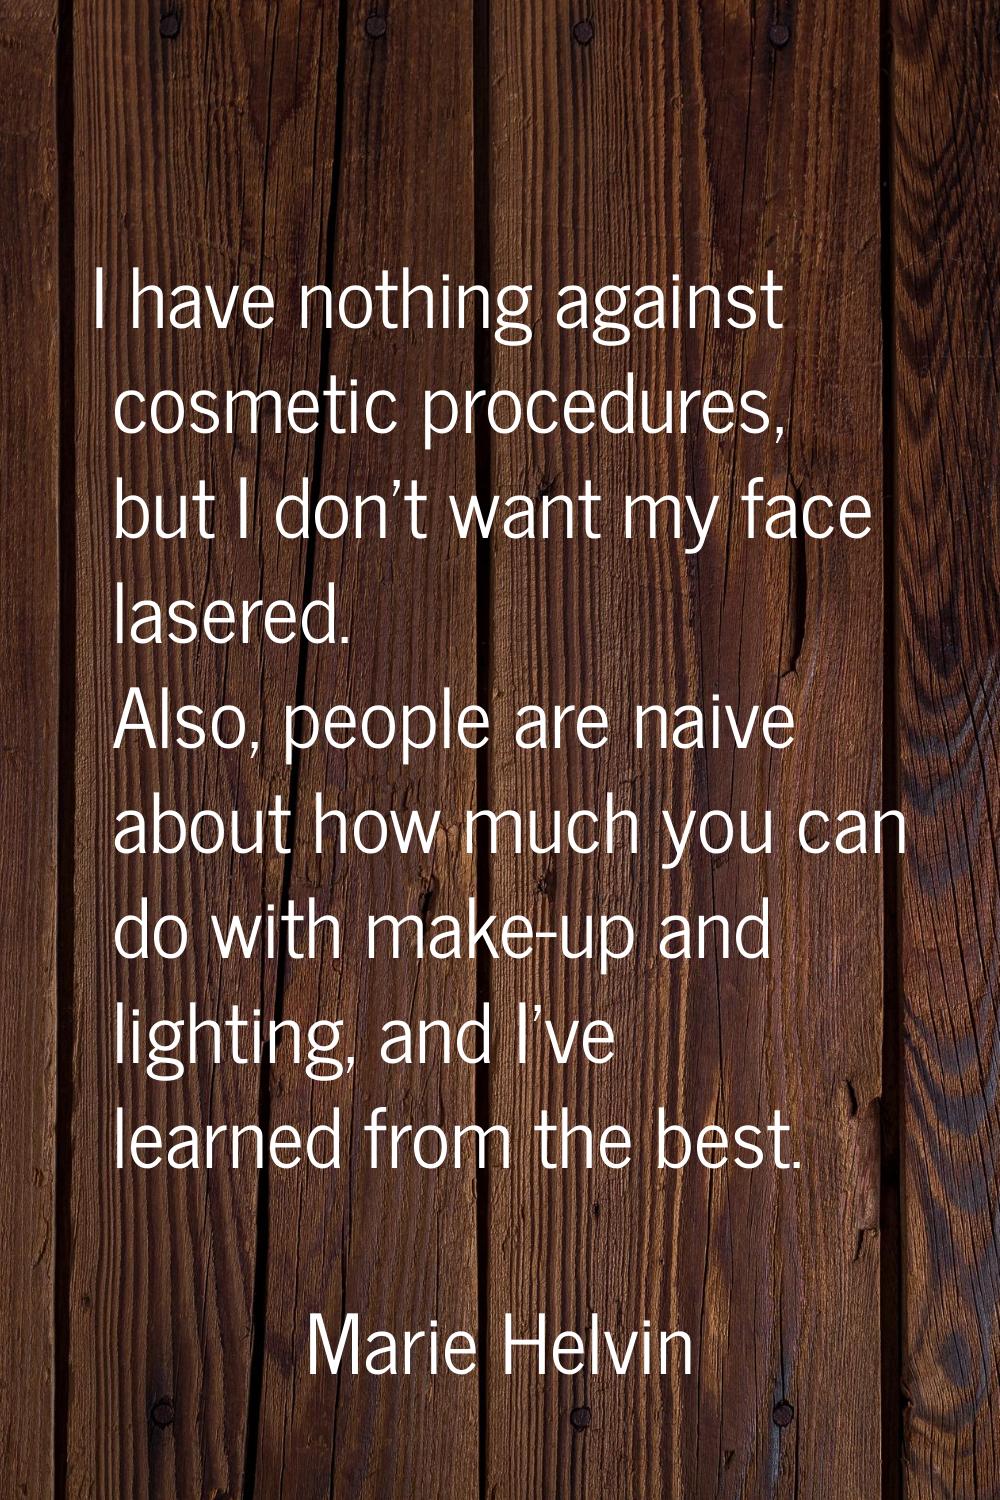 I have nothing against cosmetic procedures, but I don't want my face lasered. Also, people are naiv